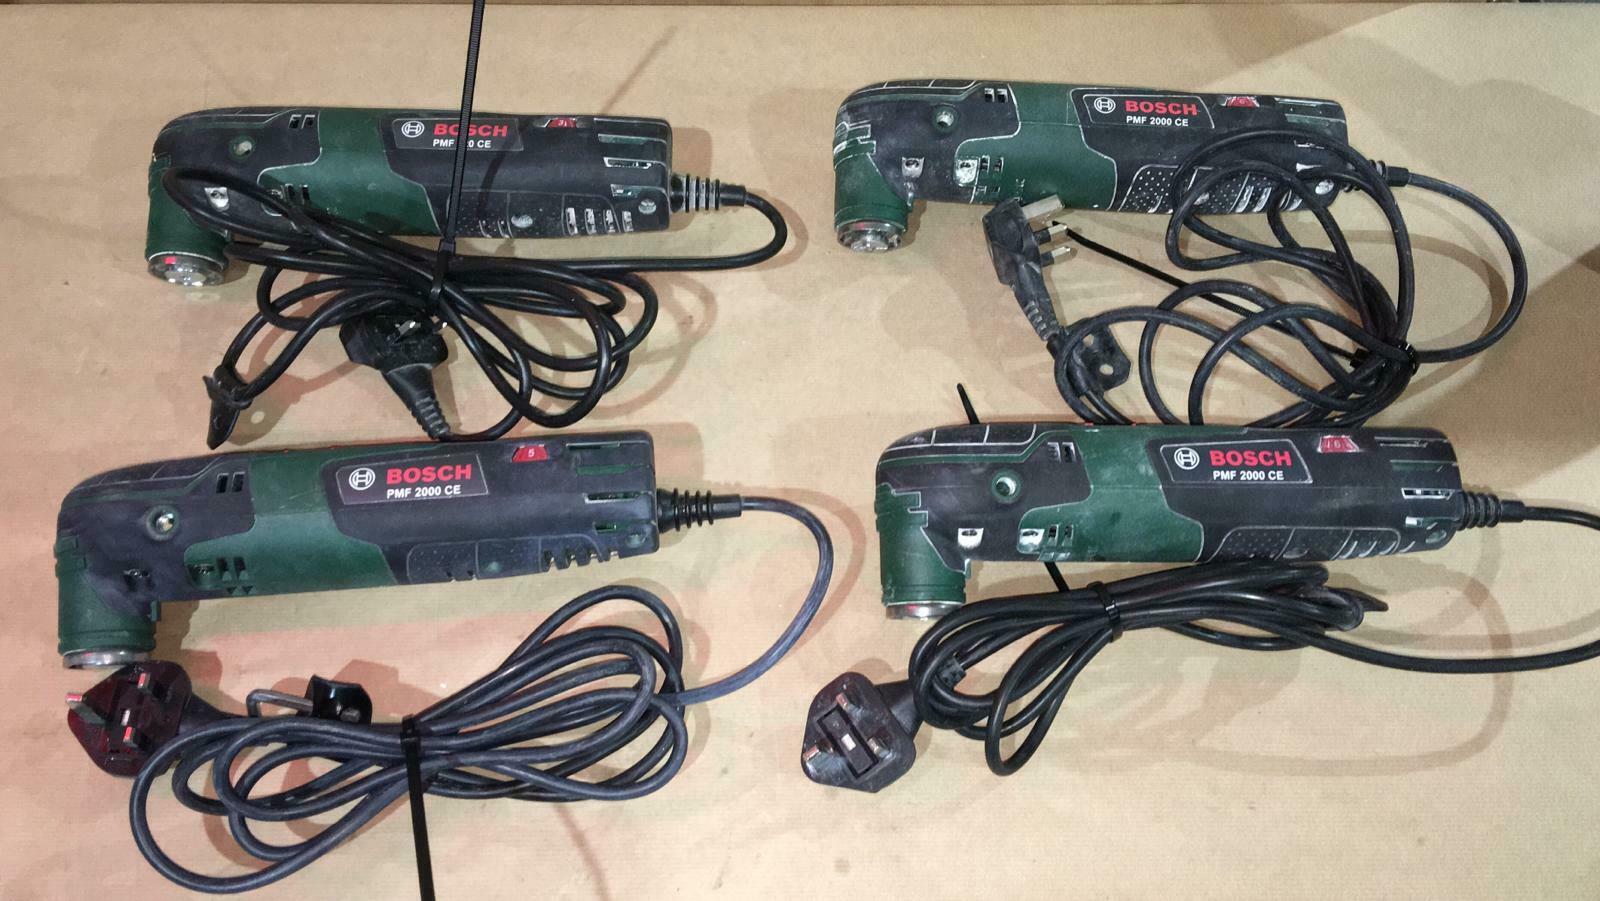 Bosch 240V 220W Corded Multi tool PMF 2000 CE - Used UVG 0591